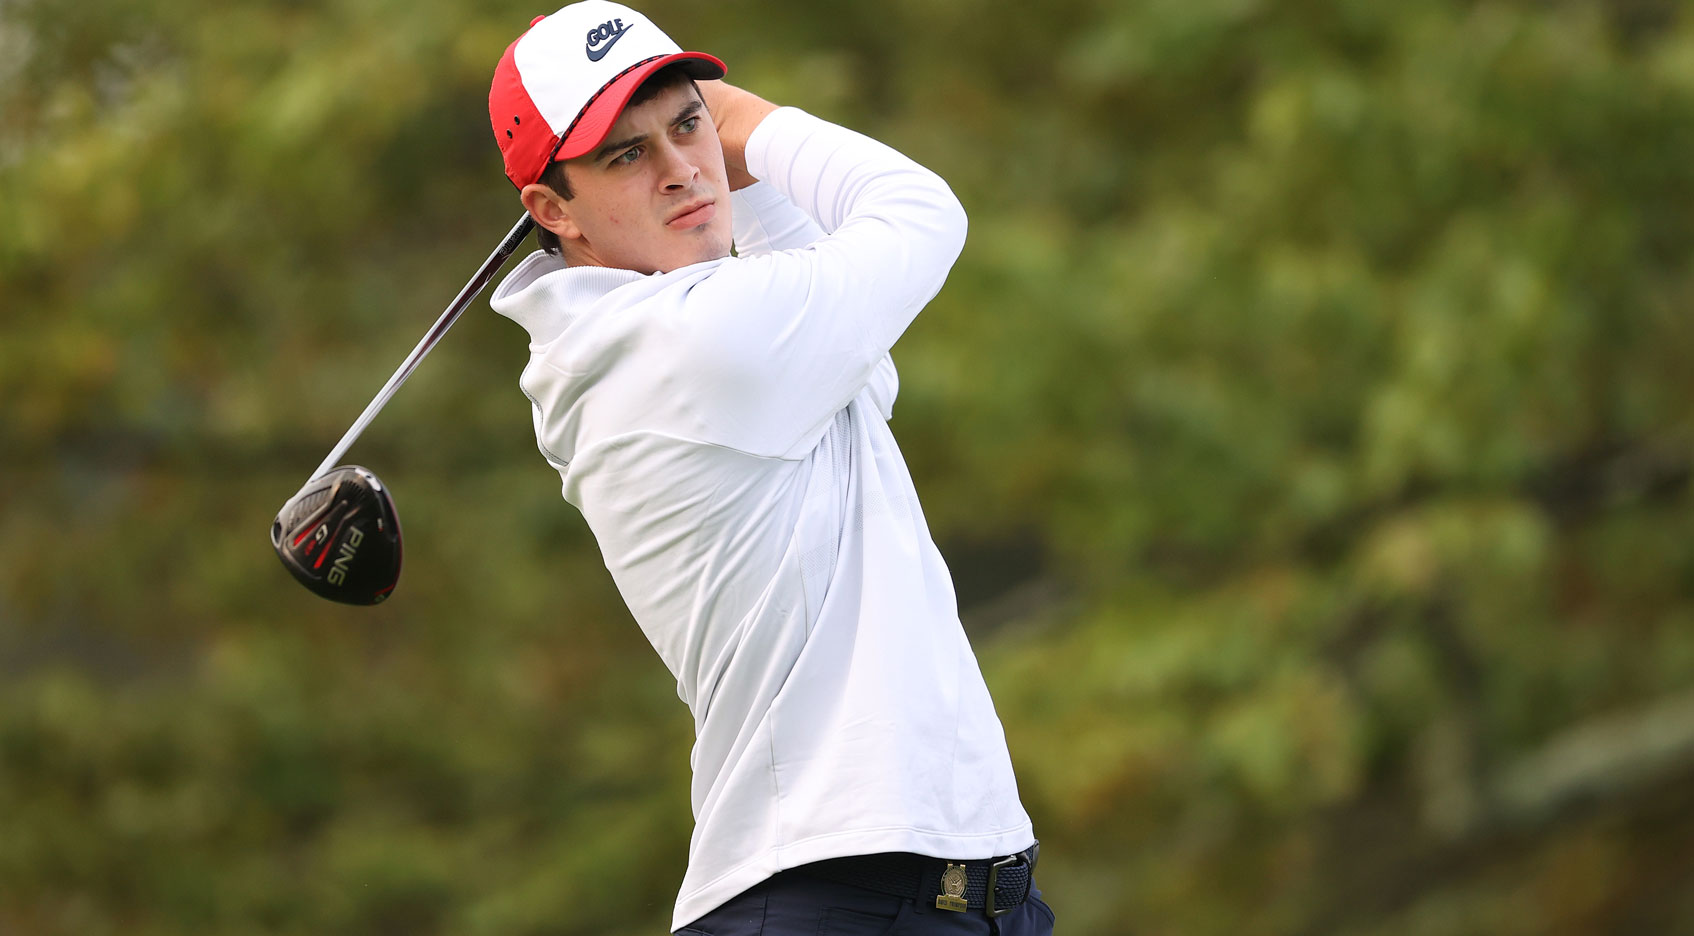 Amateur Thompson returns to The RSM Classic for another PGA TOUR opportunity